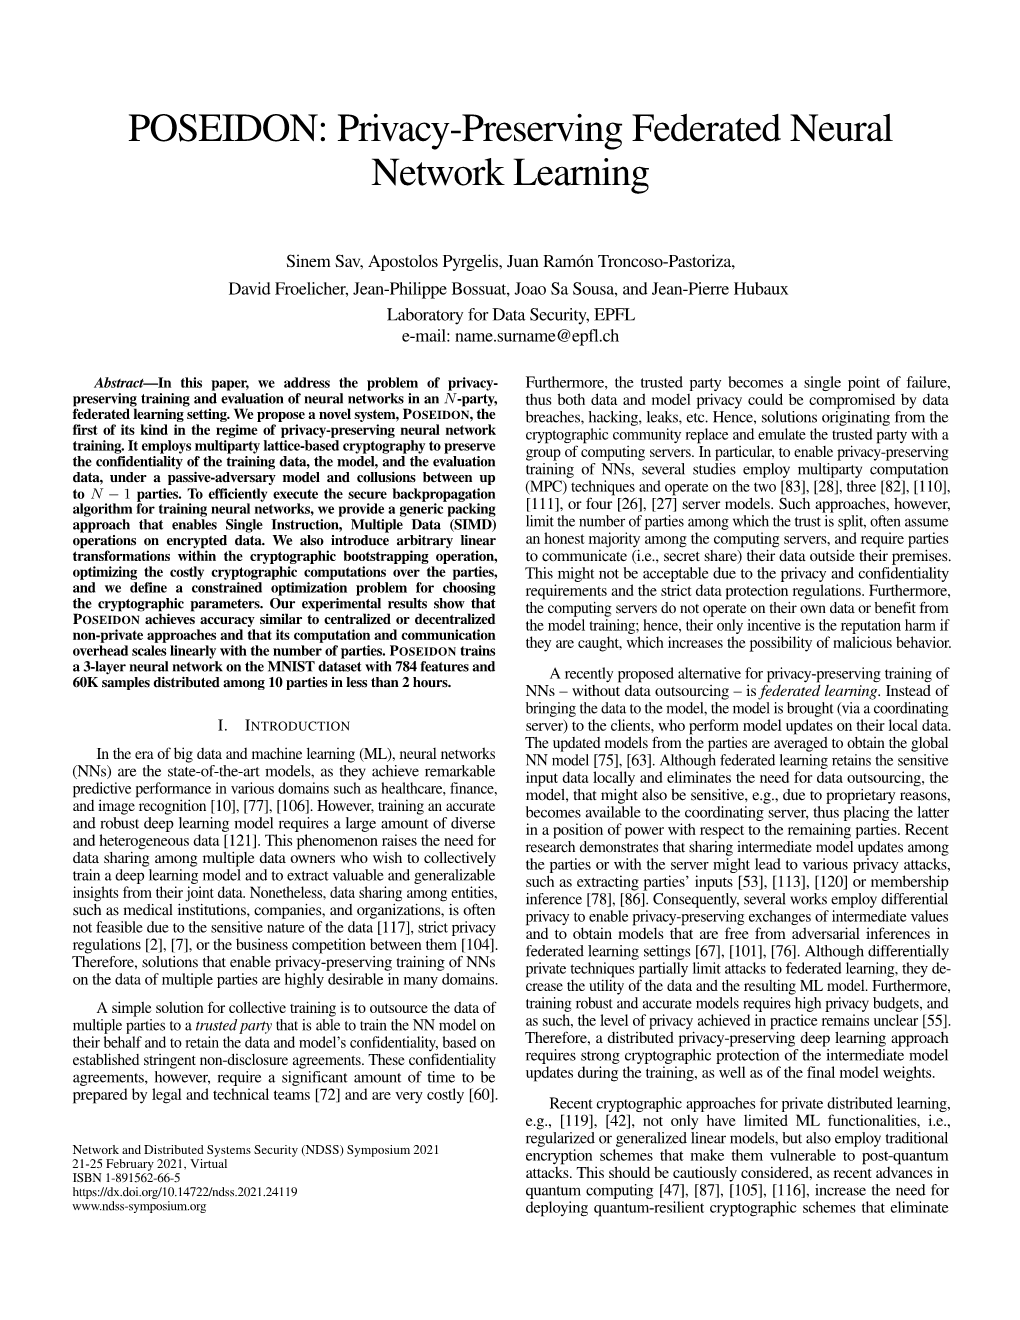 POSEIDON: Privacy-Preserving Federated Neural Network Learning